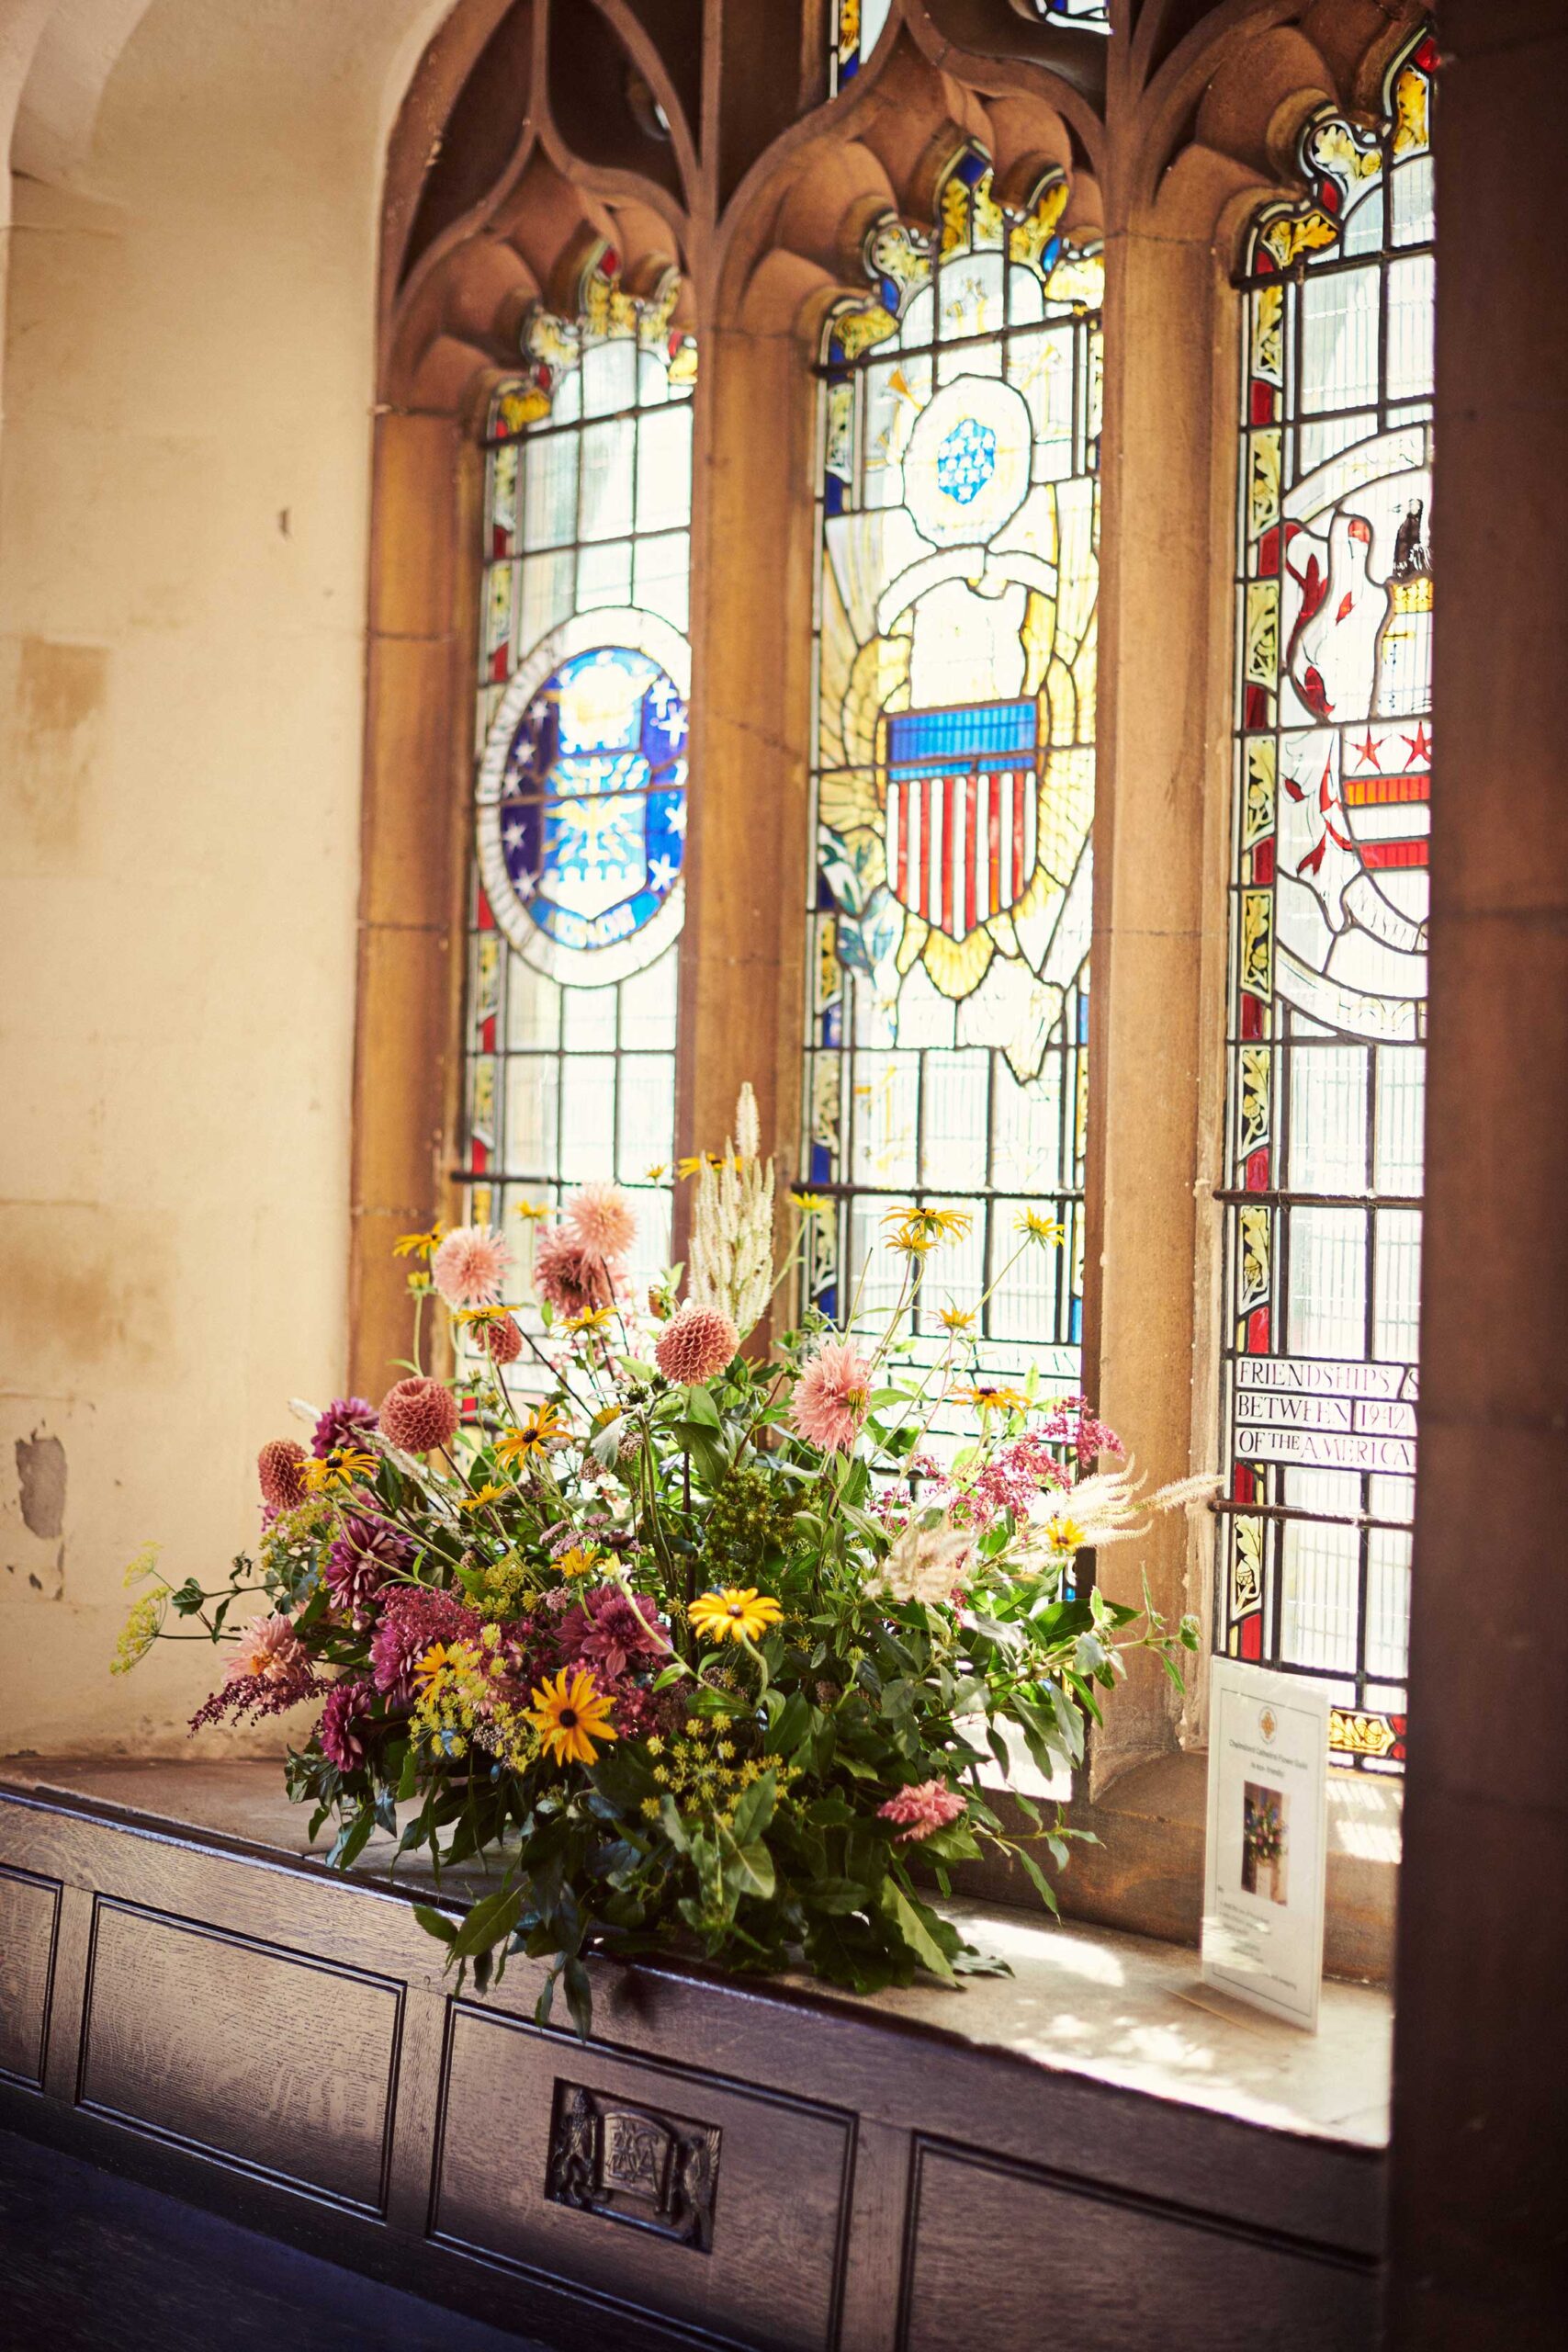 Church windows and flowers - Chelmsford - Beresfords Estate agents - Essex